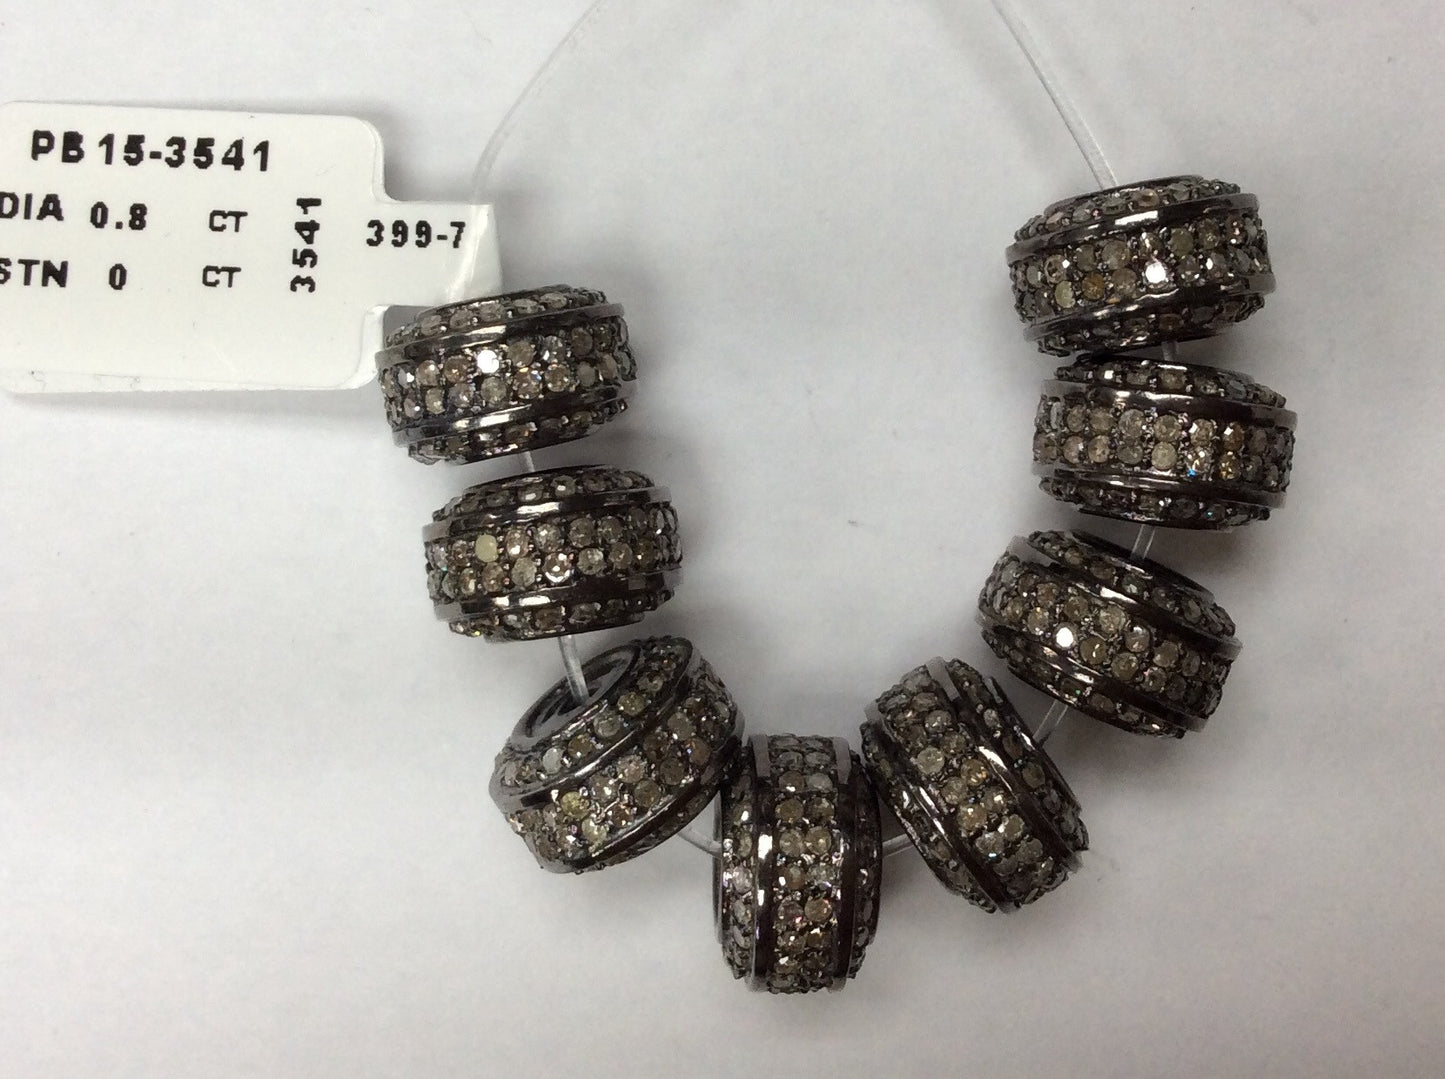 Donut Diamond Beads .925 Oxidized Sterling Silver Diamond Beads, Genuine handmade pave diamond Beads Size Approx 0.48"(7 x 12 MM)